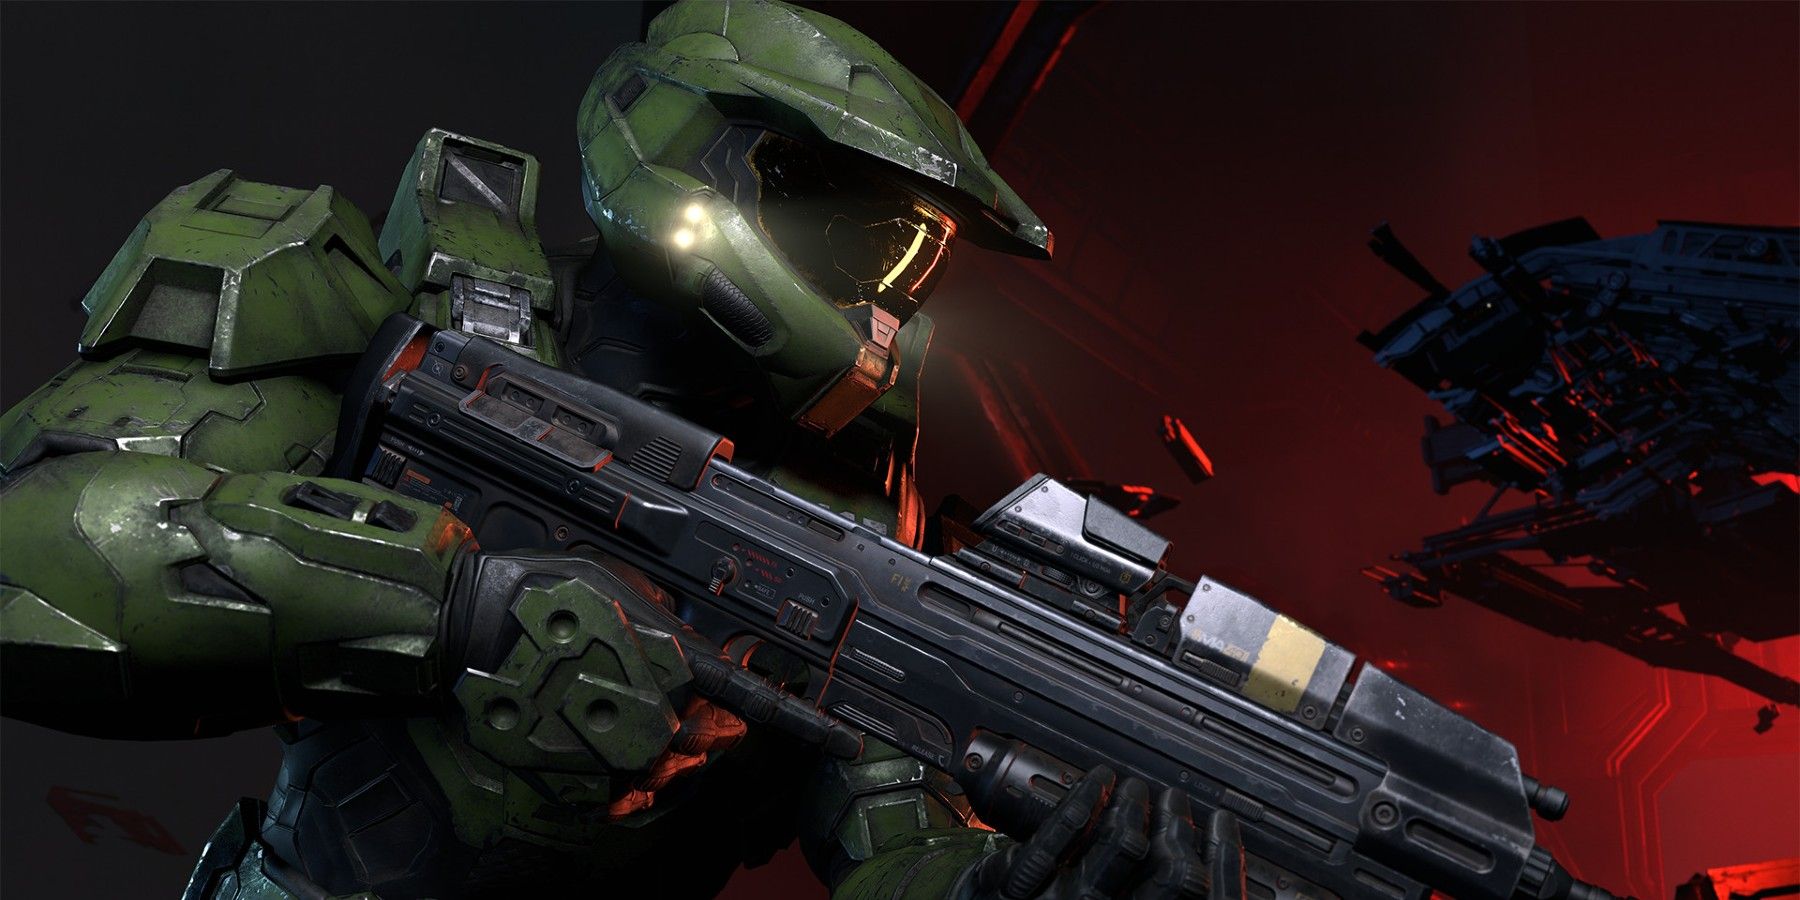 Halo Infinite Daily Challenges Will Take 16 to 18 Hours Per Day to Complete